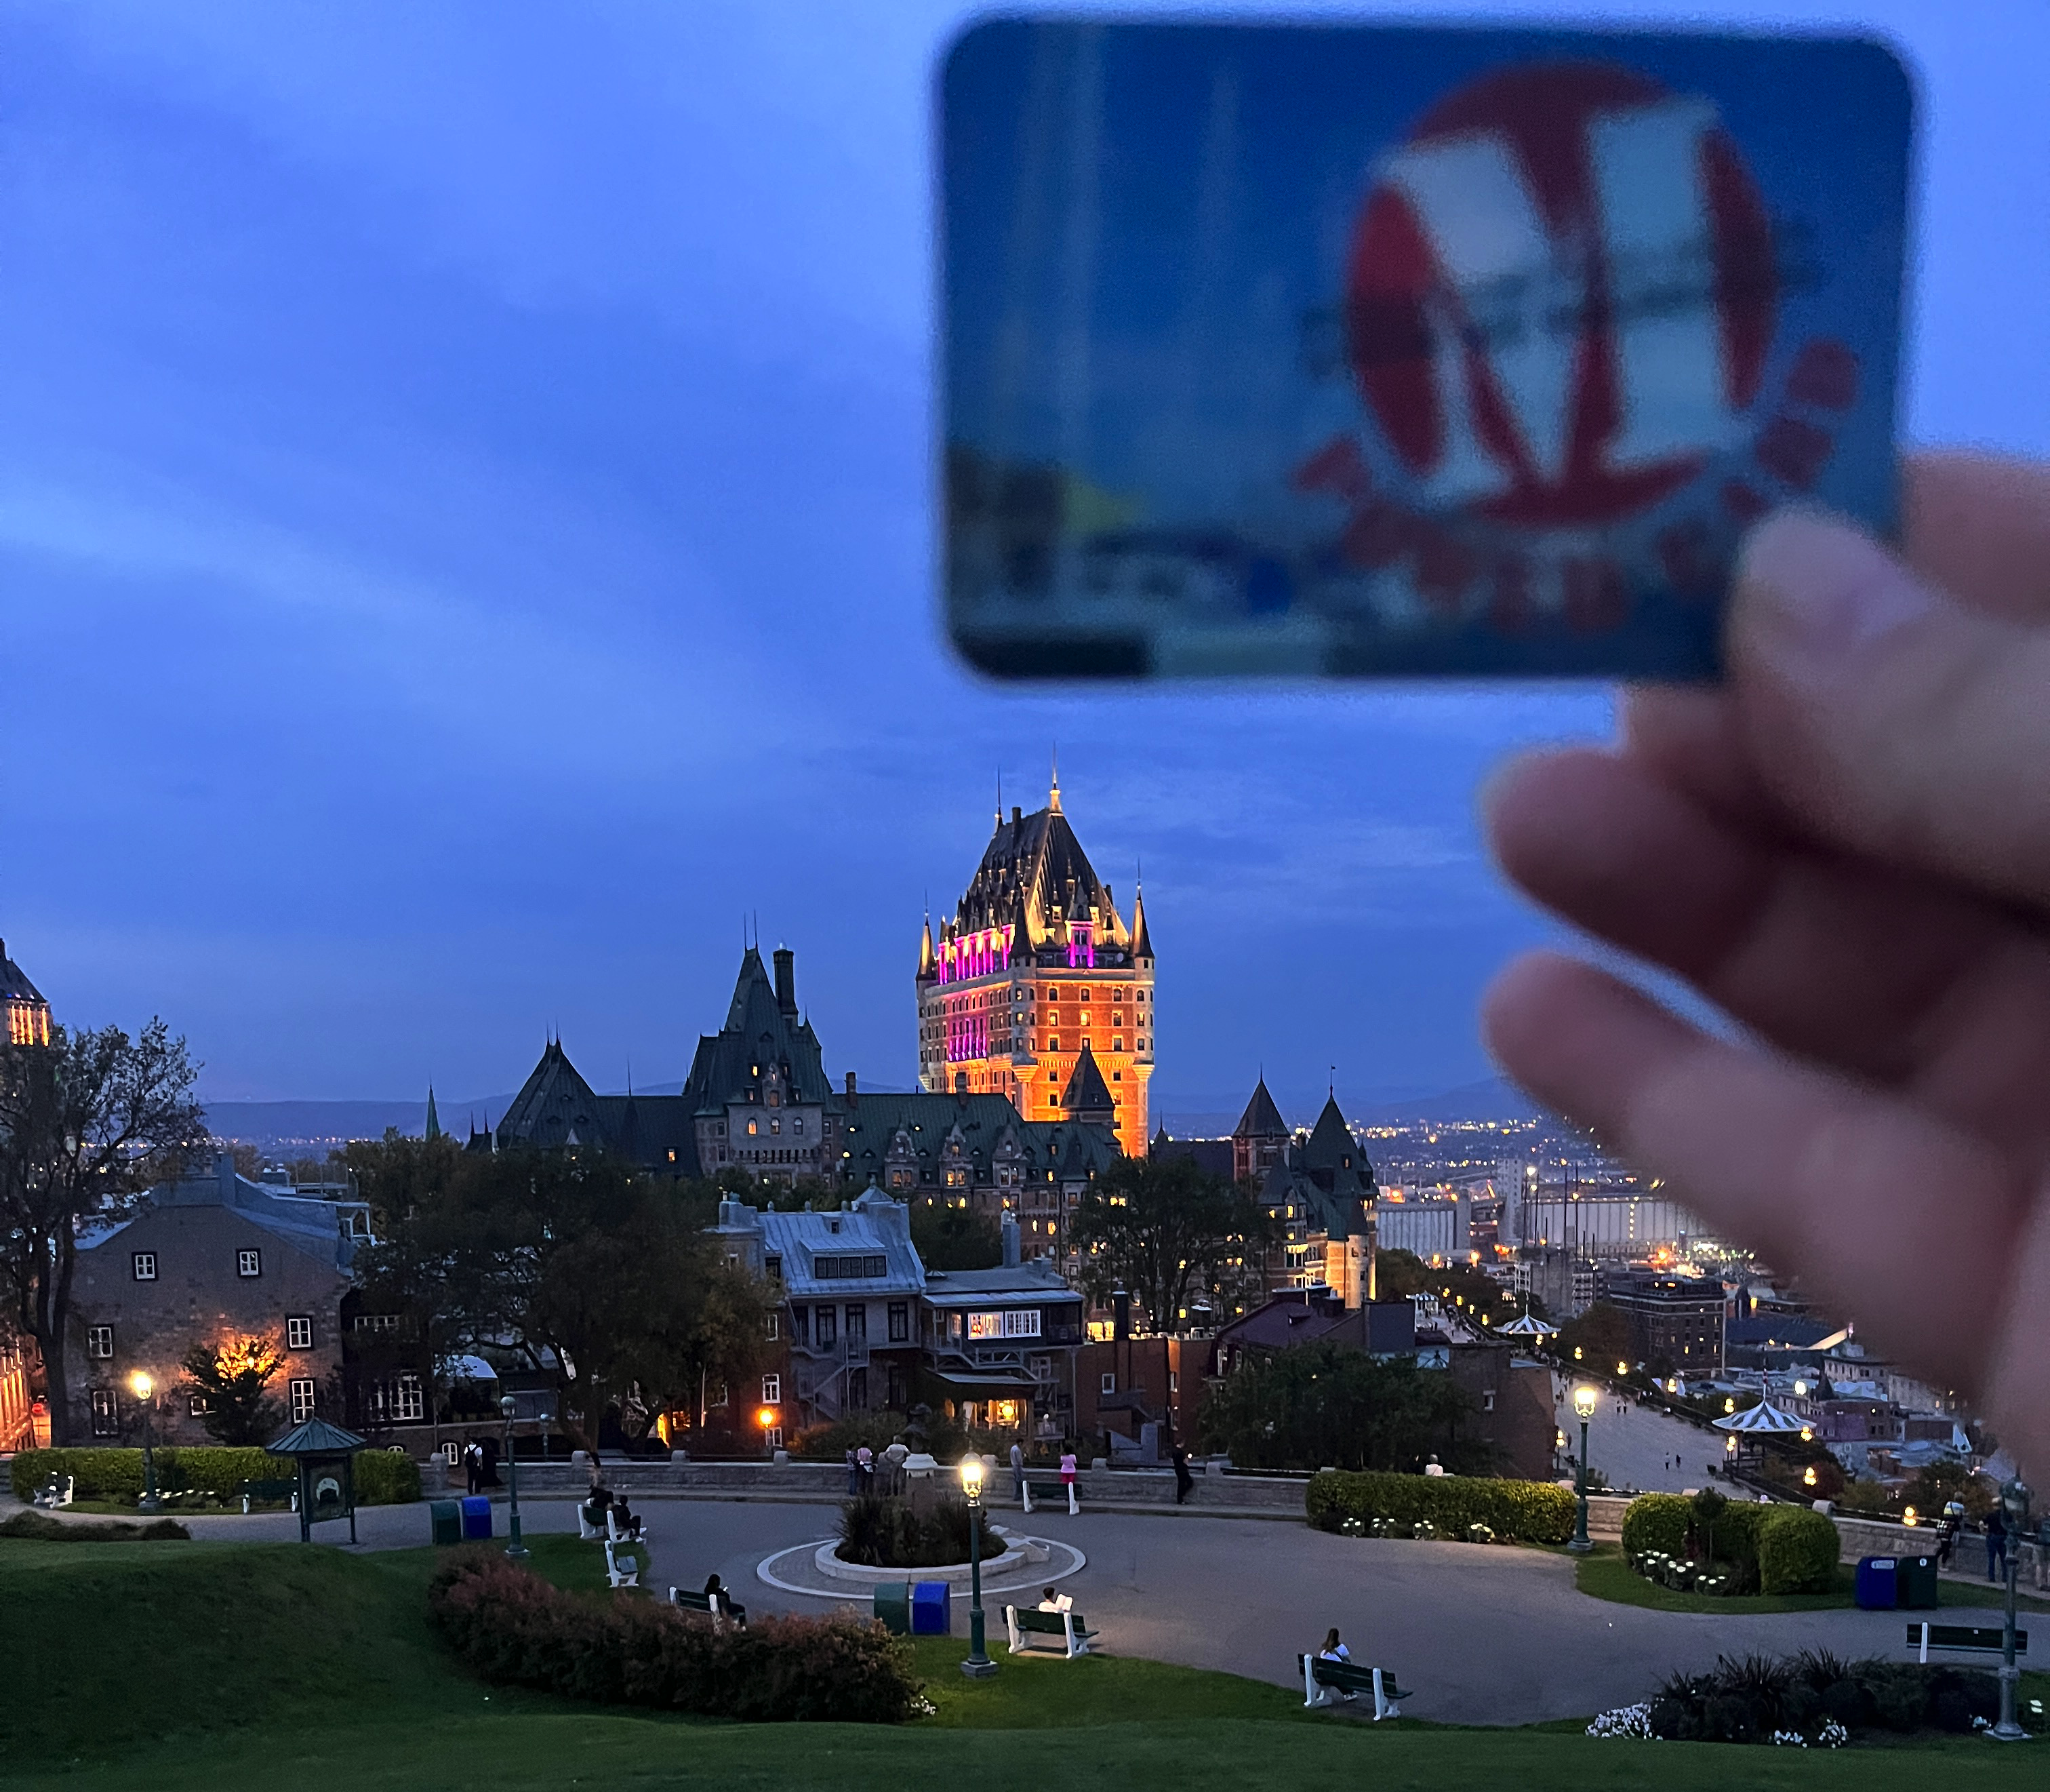 Anne Arundel County Library card shown in the foreground of an early evening photo overlooking Quebec City